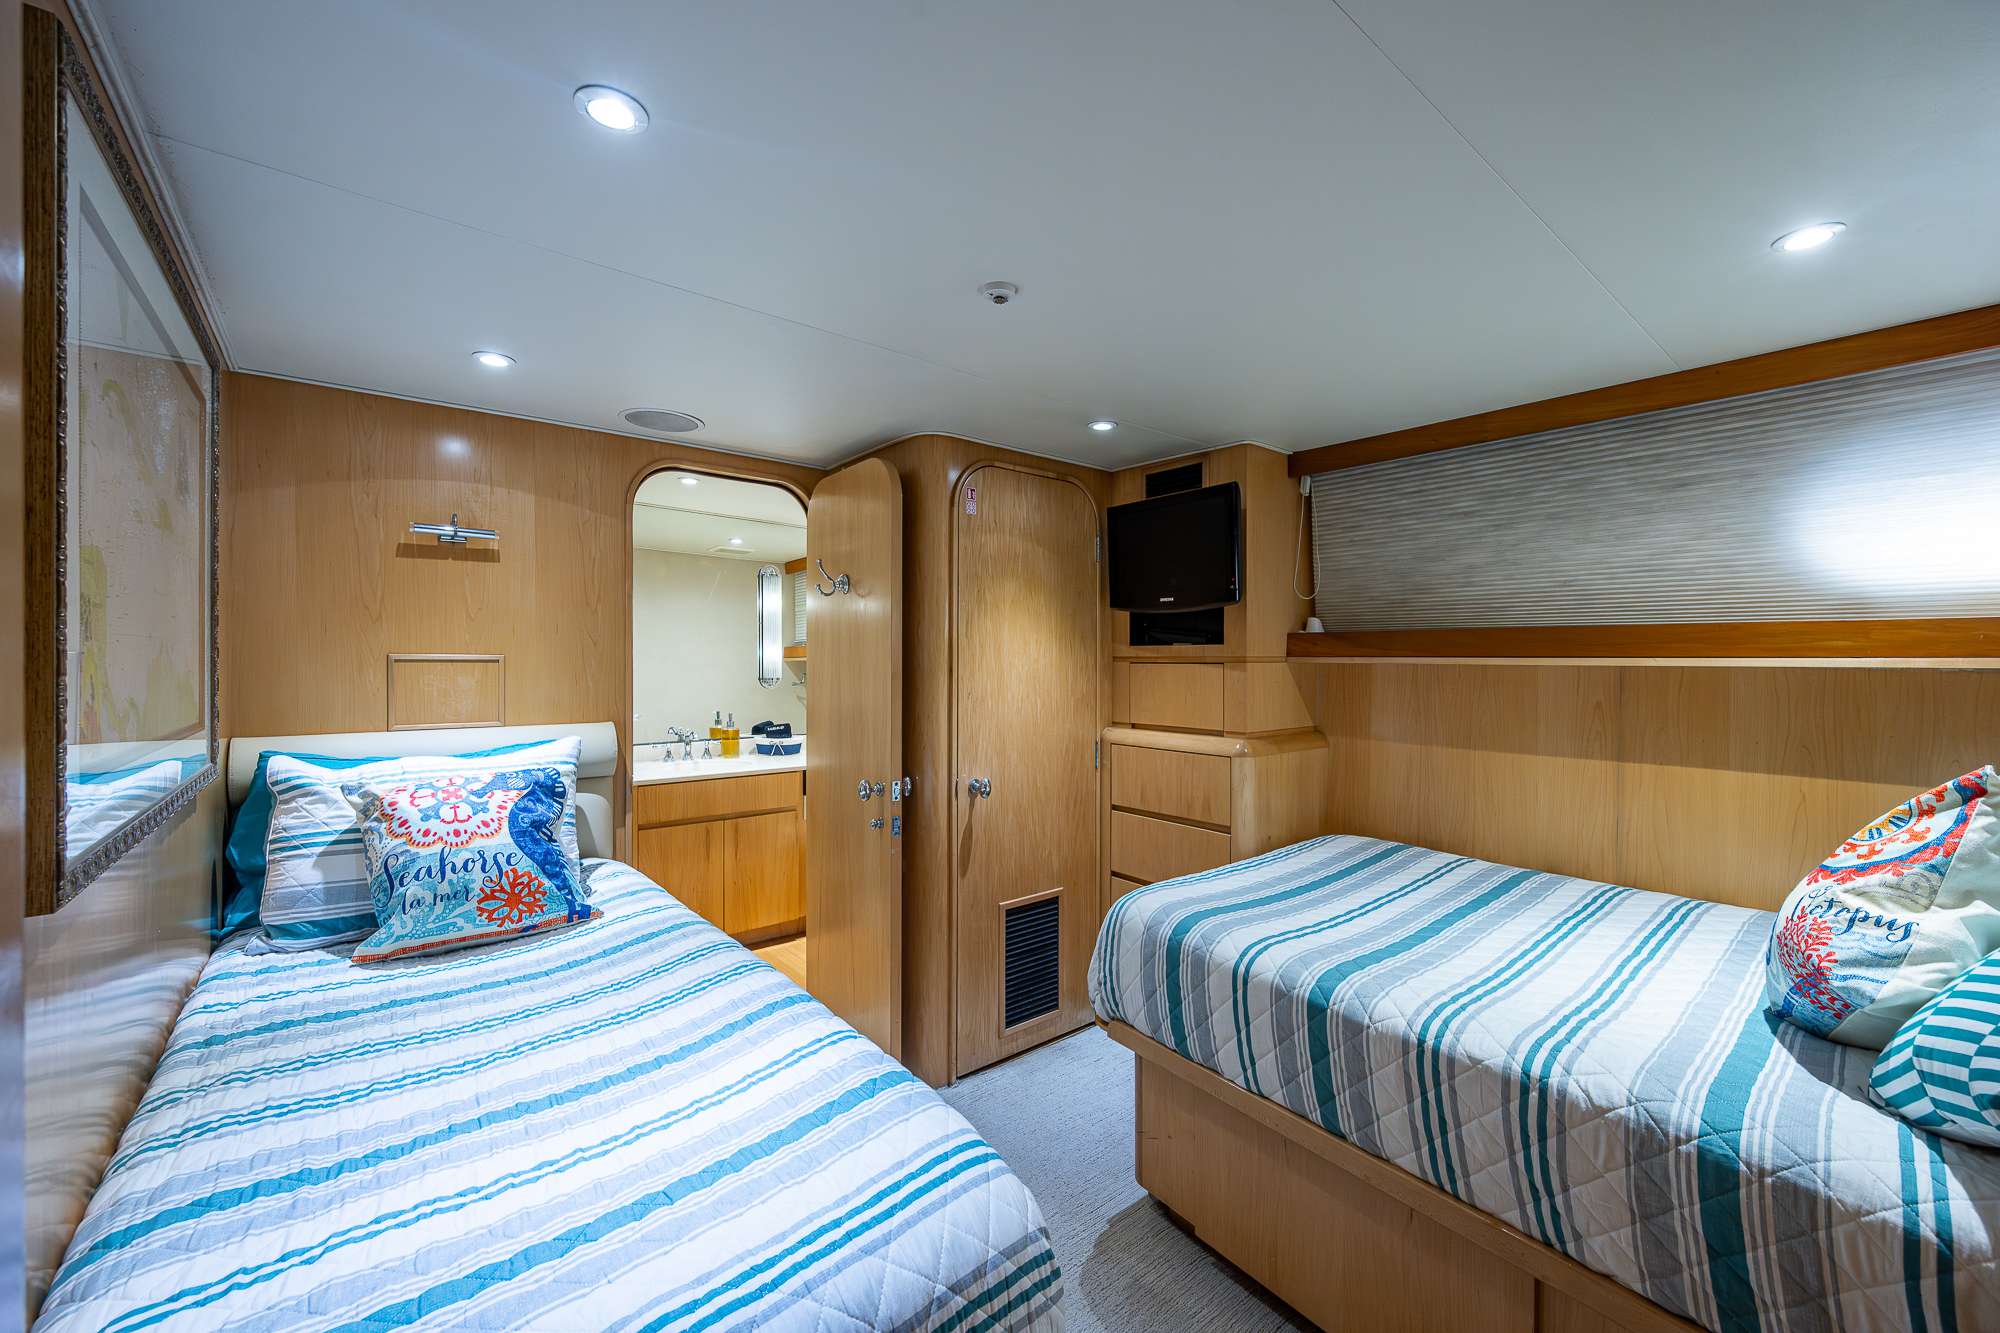 LADY SHARON GALE Yacht Charter - primary head has beautiful marble